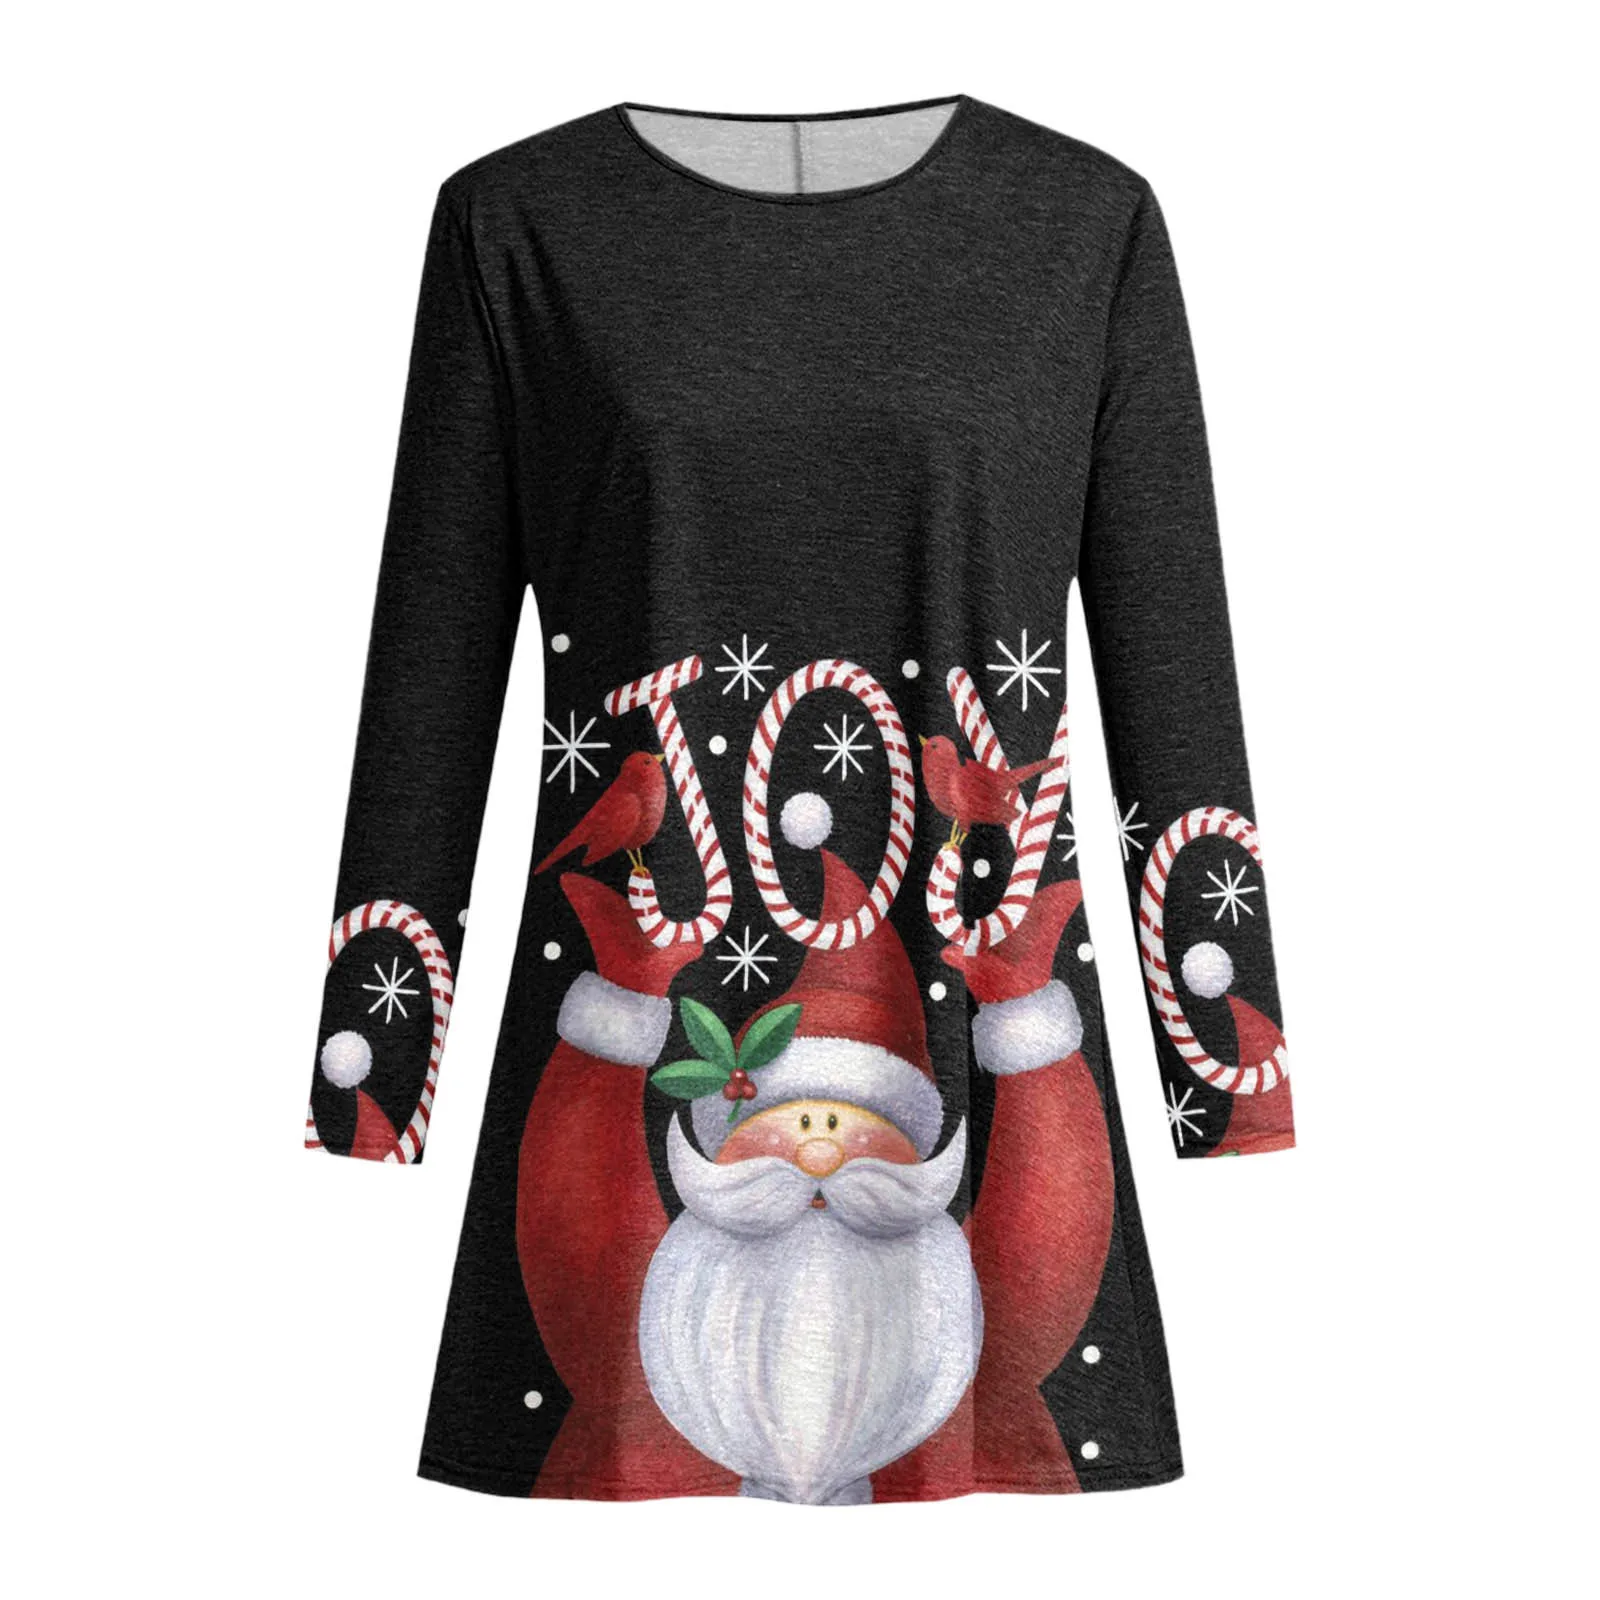 Christmas Women Dress  Reindeer Santa Fashion Printed Winter Casual Long Sleeve For Party Night Occasions 